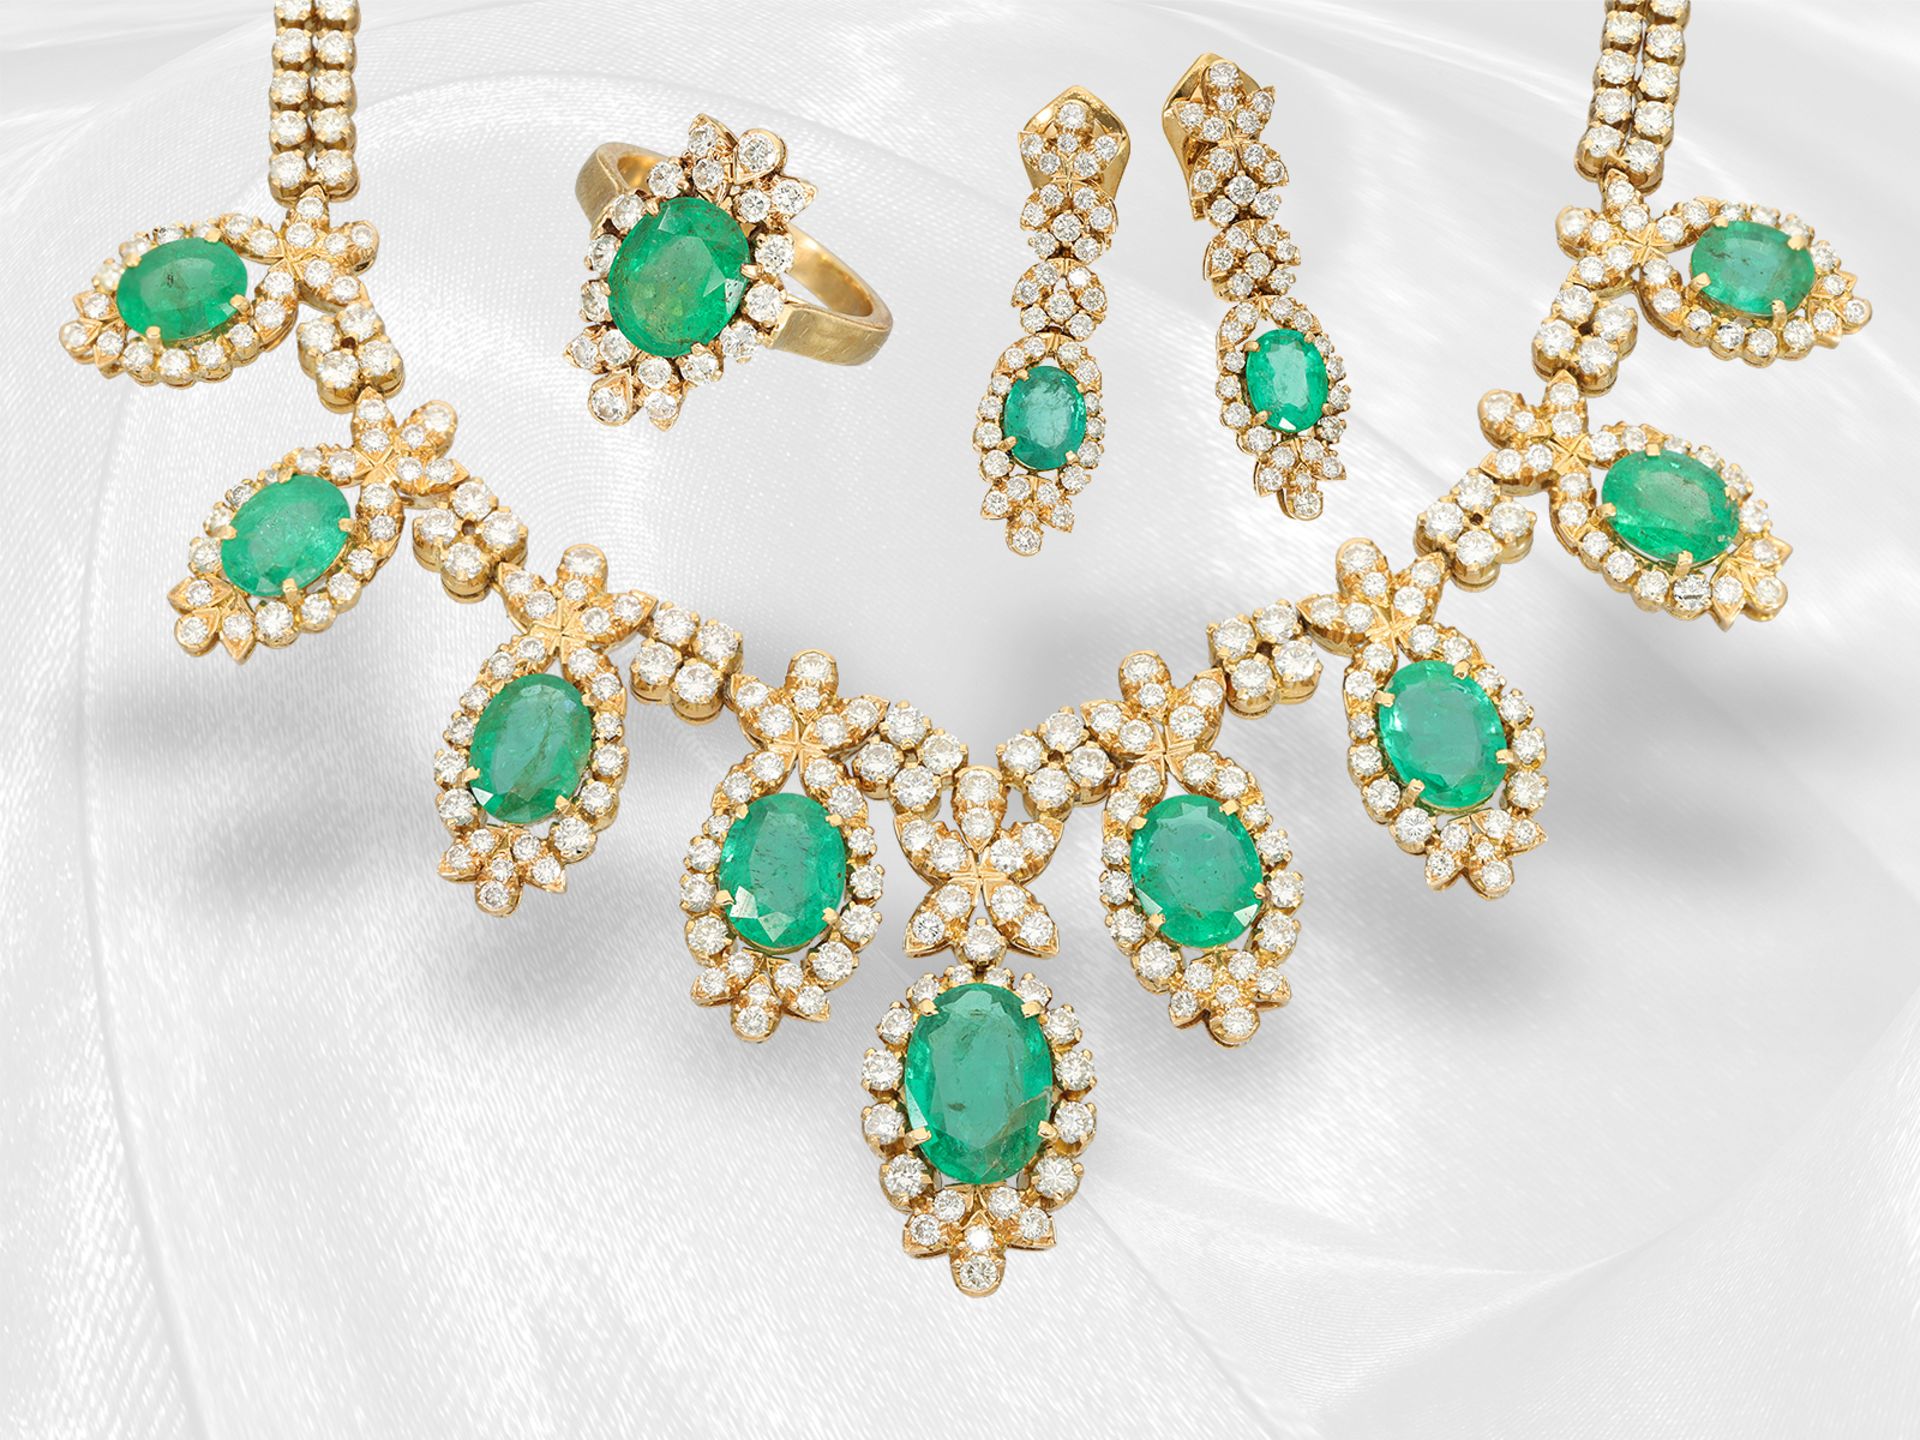 Necklace/ring/earrings: extremely high quality emerald/brilliant-cut diamond set in original case, a - Image 8 of 10